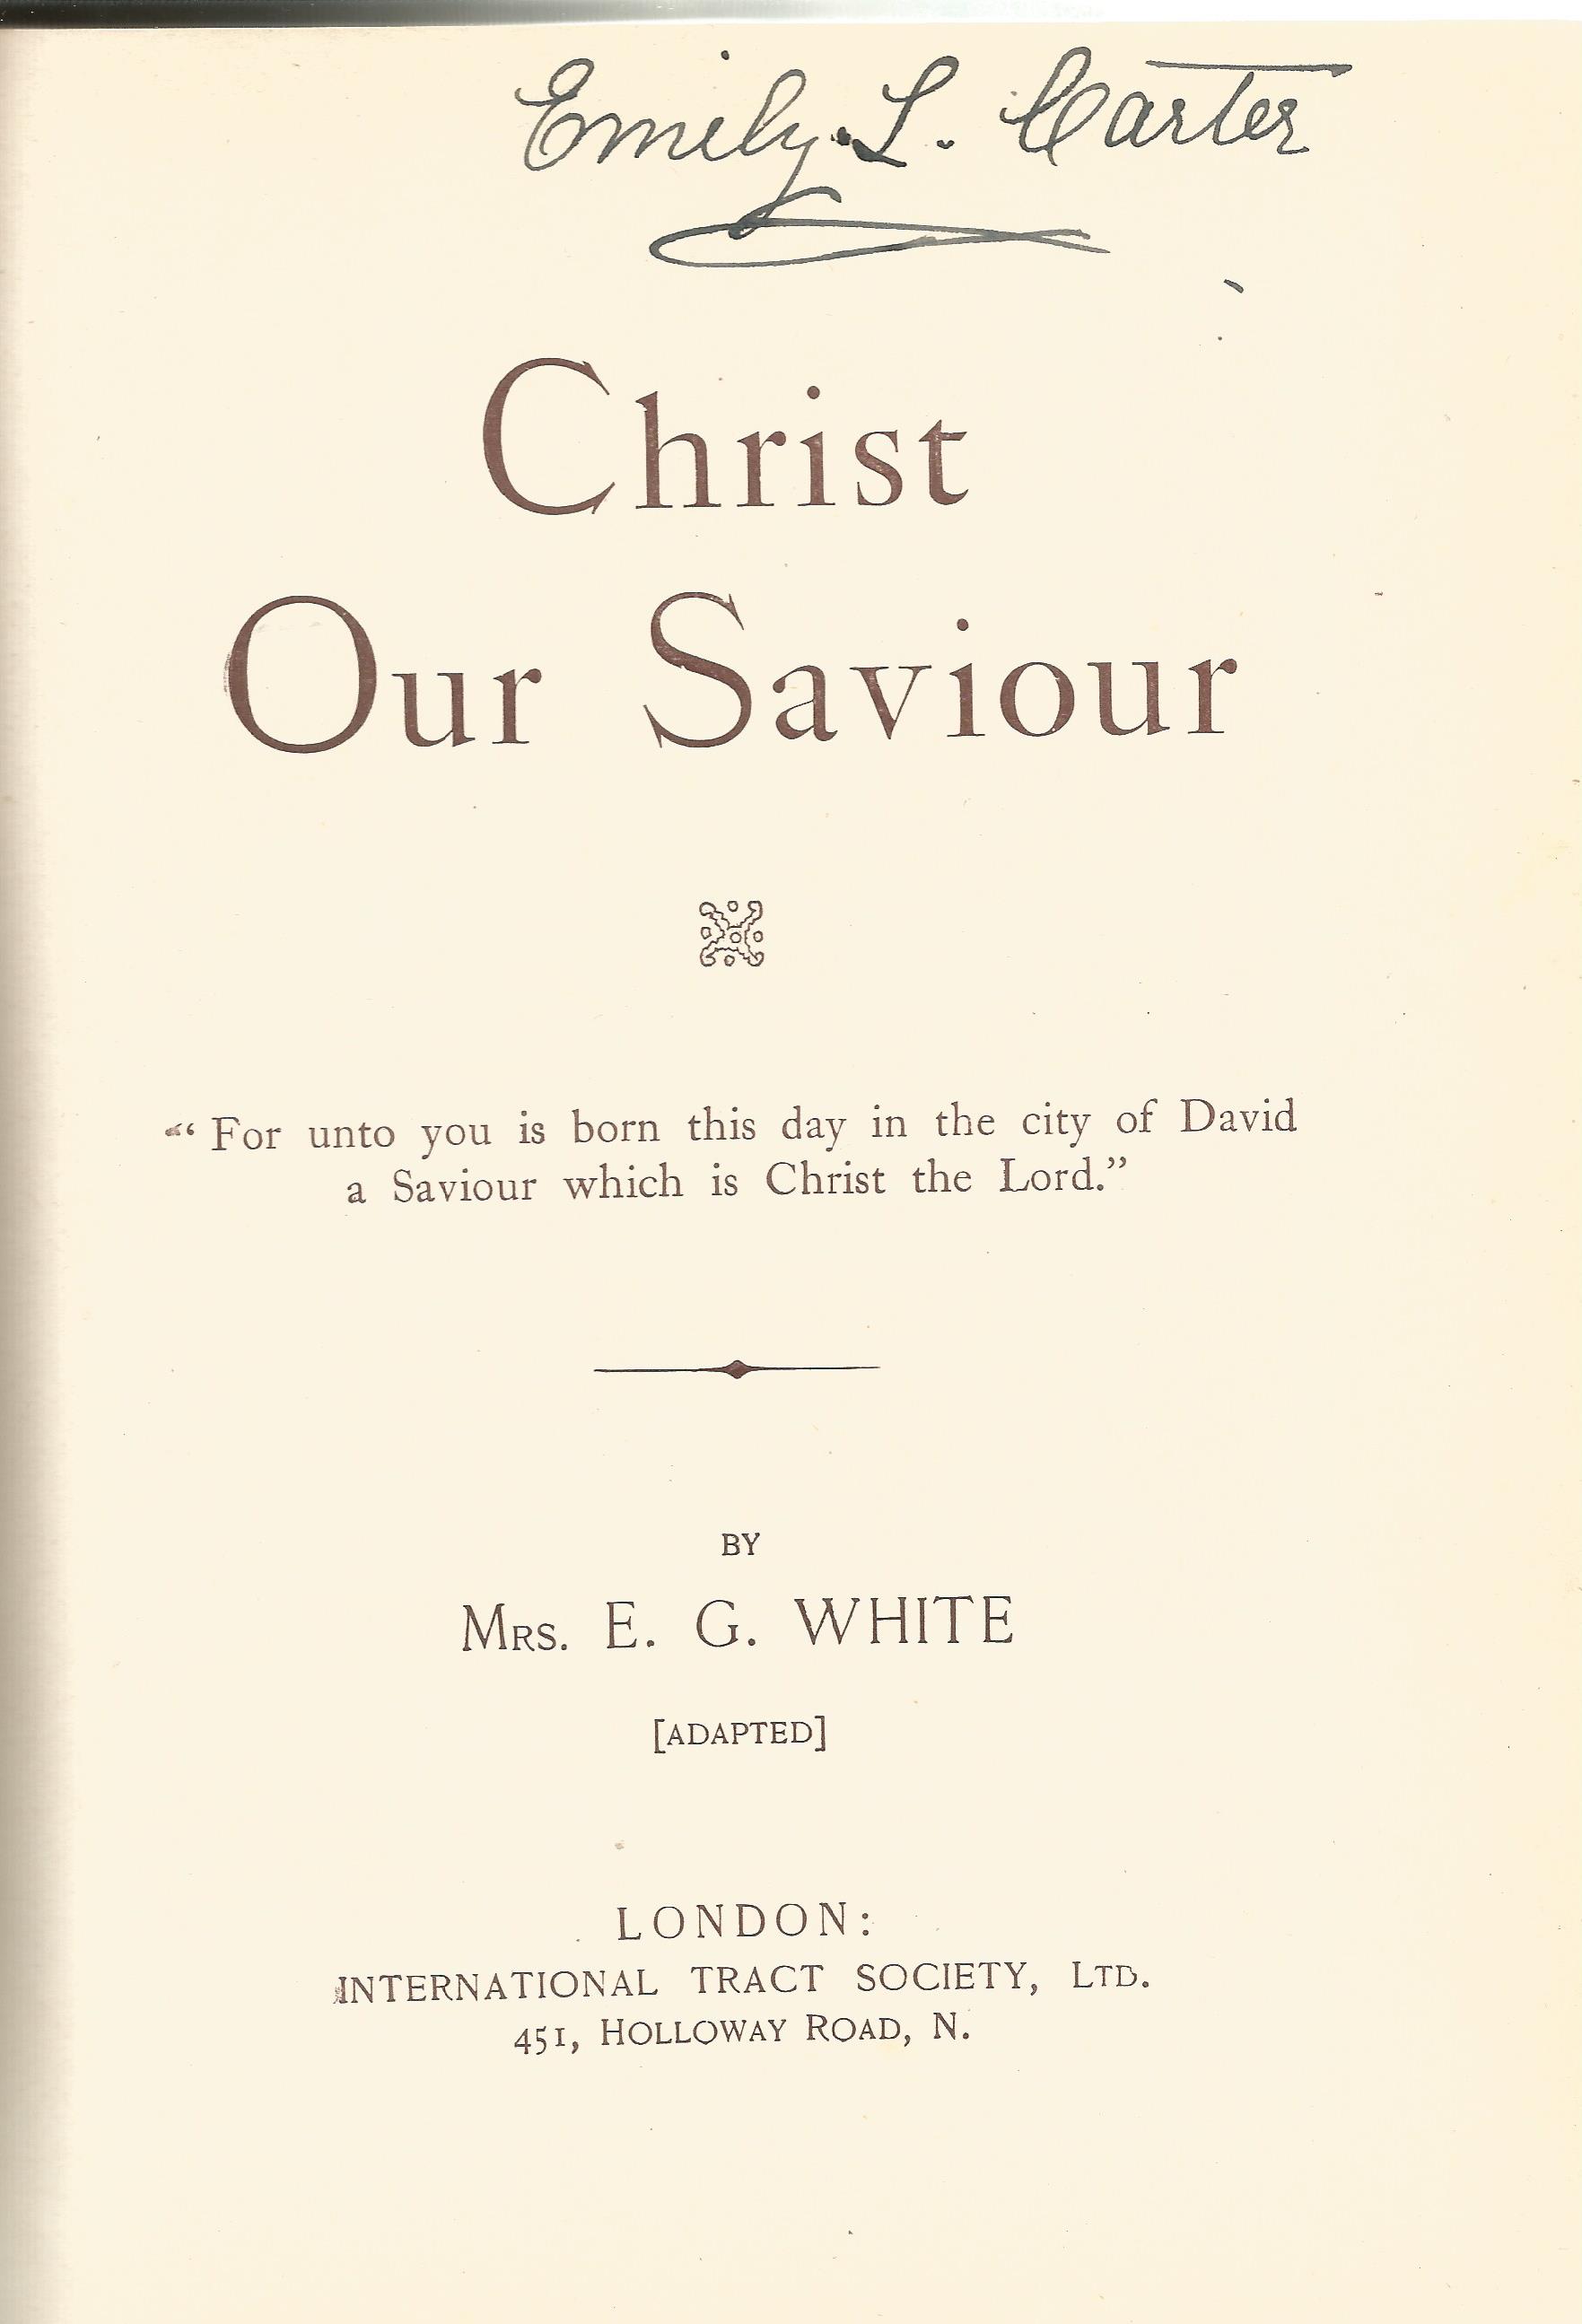 Christ Our Saviour by Mrs E G White Hardback Book published by International Tract Society Ltd - Image 2 of 2